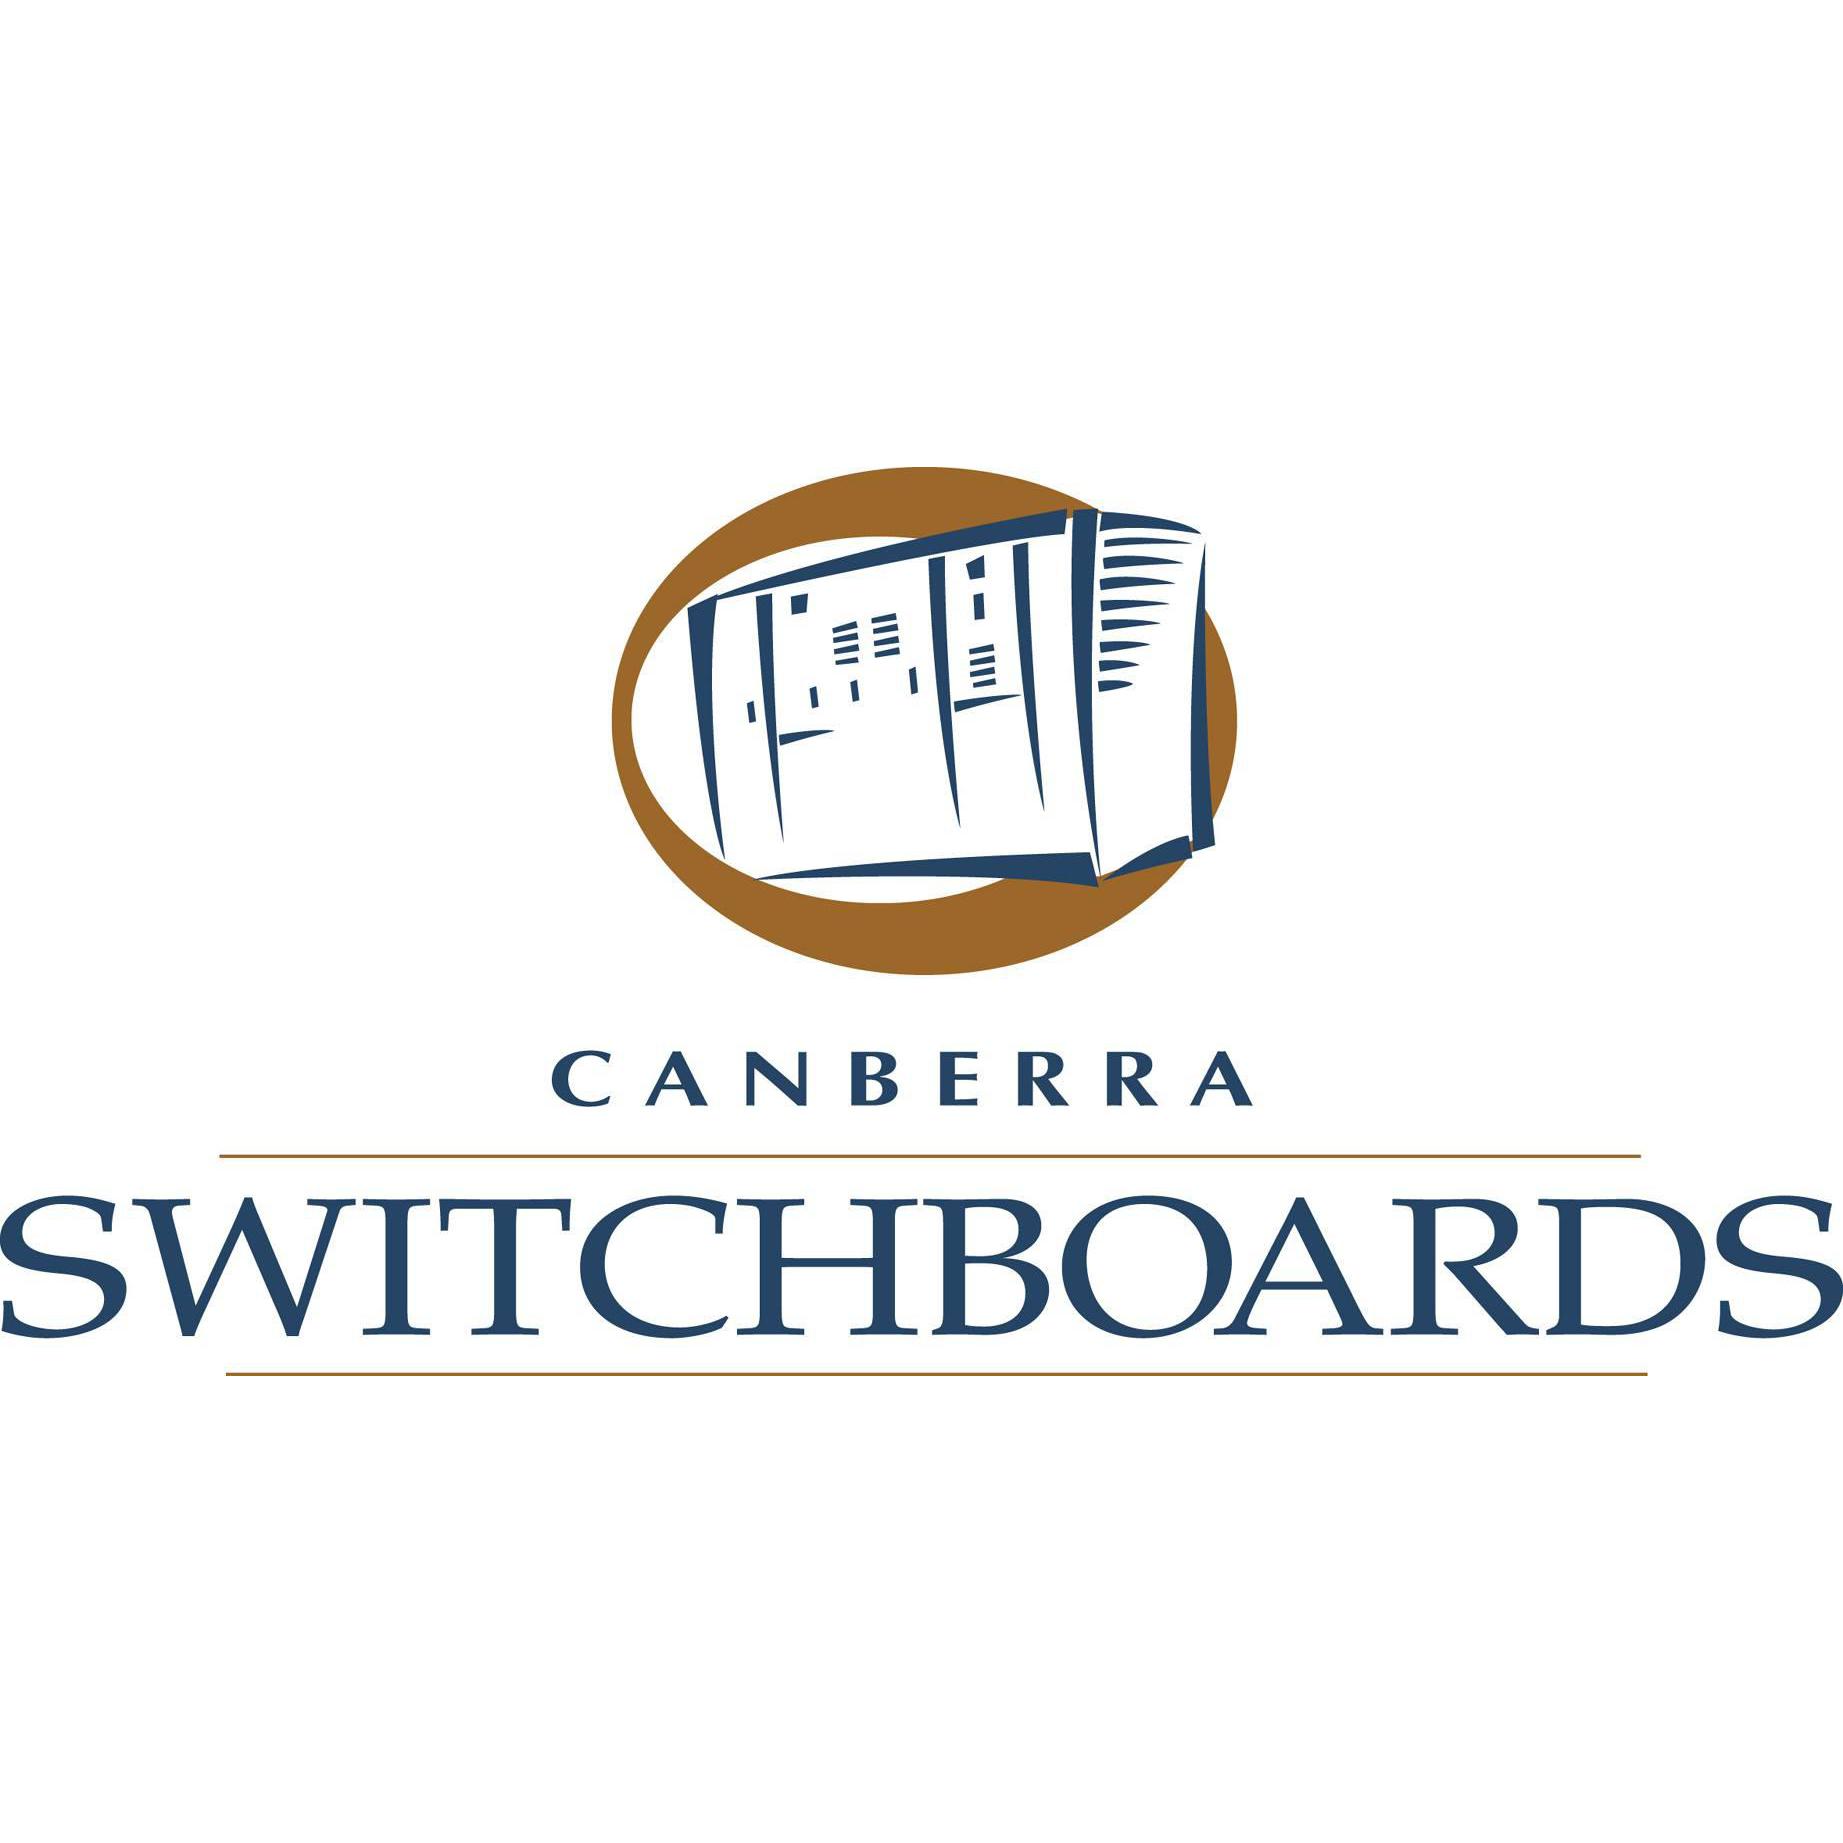 Canberra Switchboards Queanbeyan East (02) 6299 6232